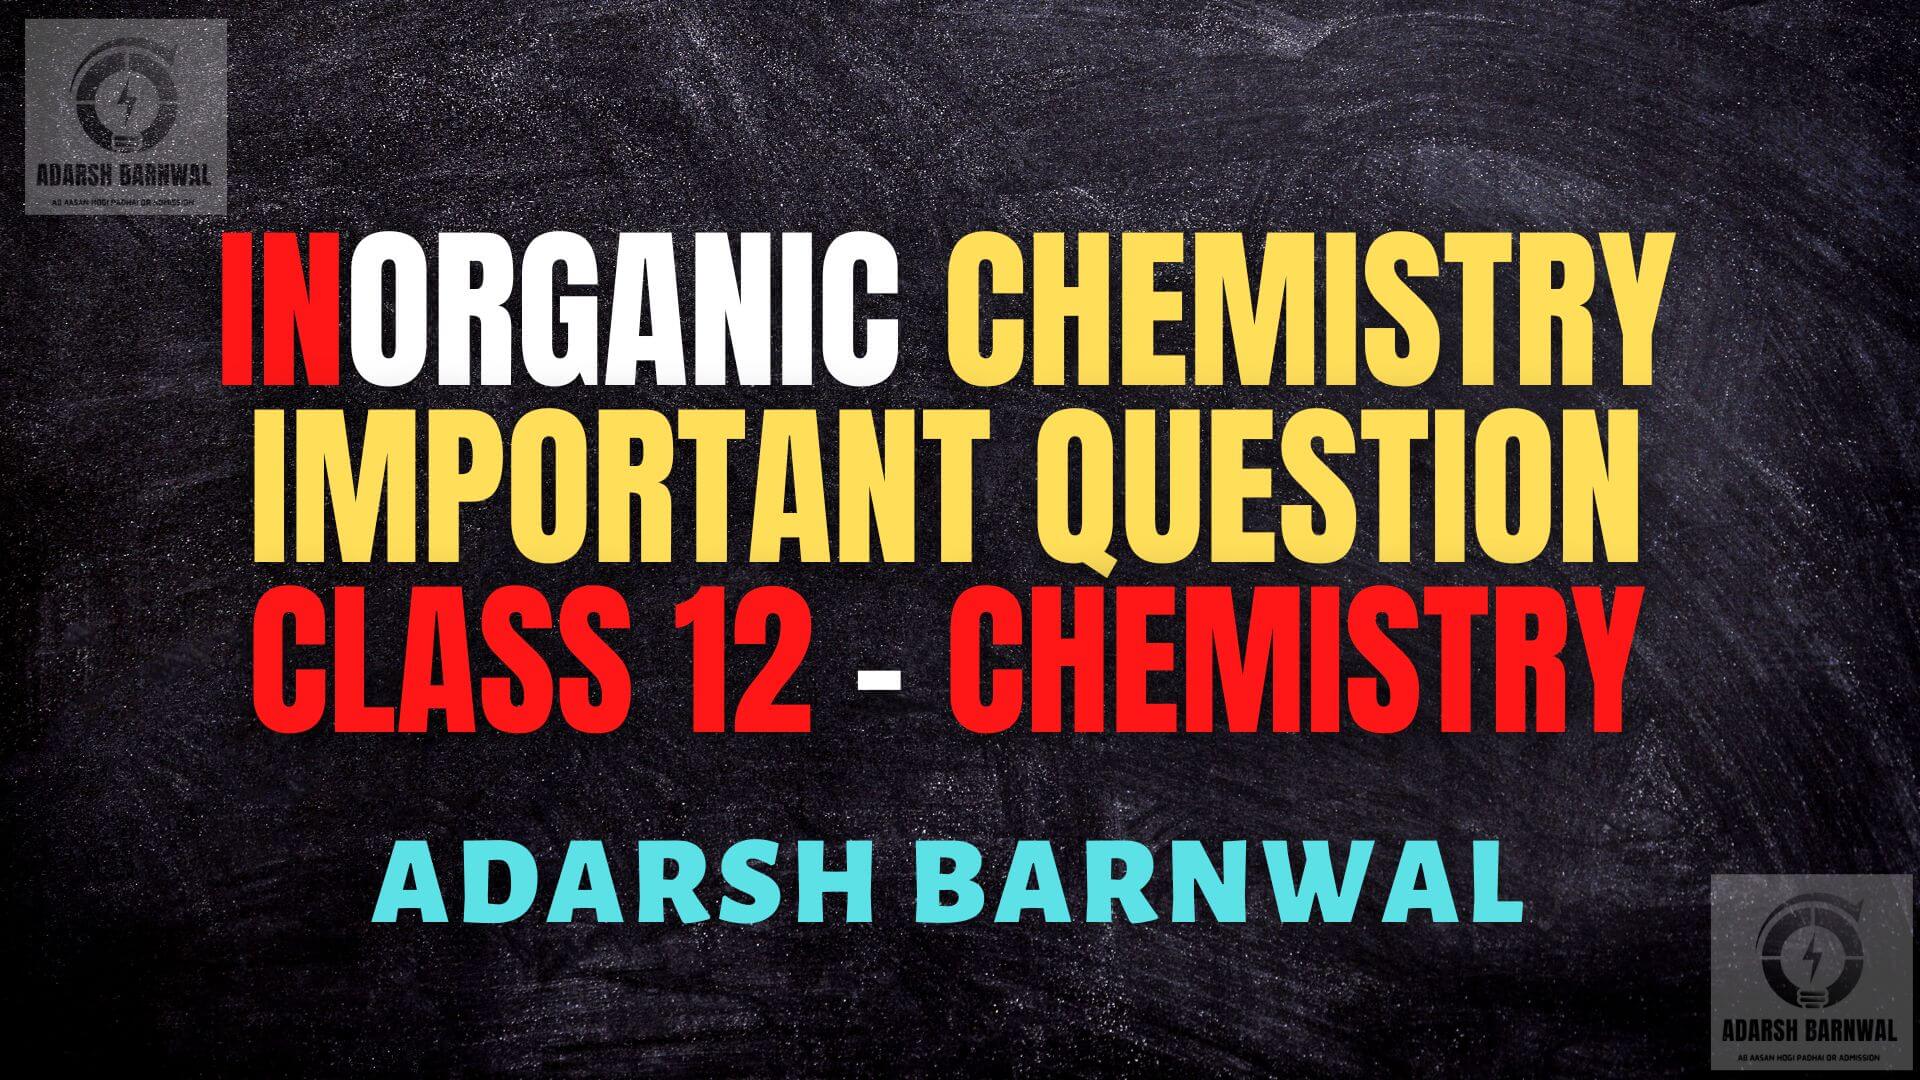 Class 12 Inorganic Chemistry Important questions By Adarsh Barnwal